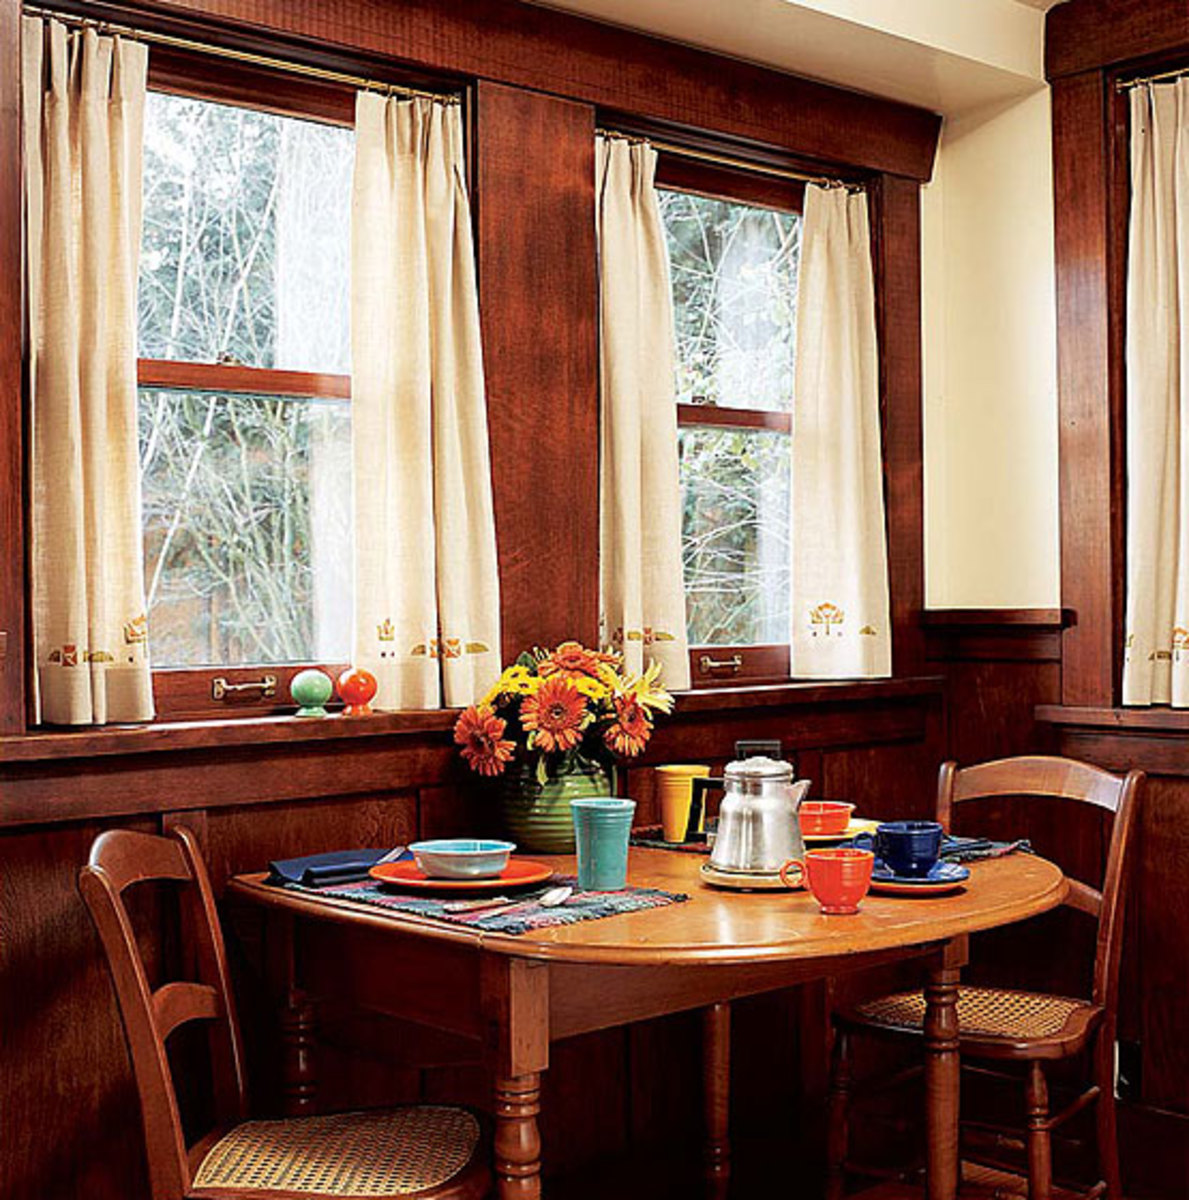 The Ultimate Guide to Arts & Crafts Craftsman Bungalows, Part II ...